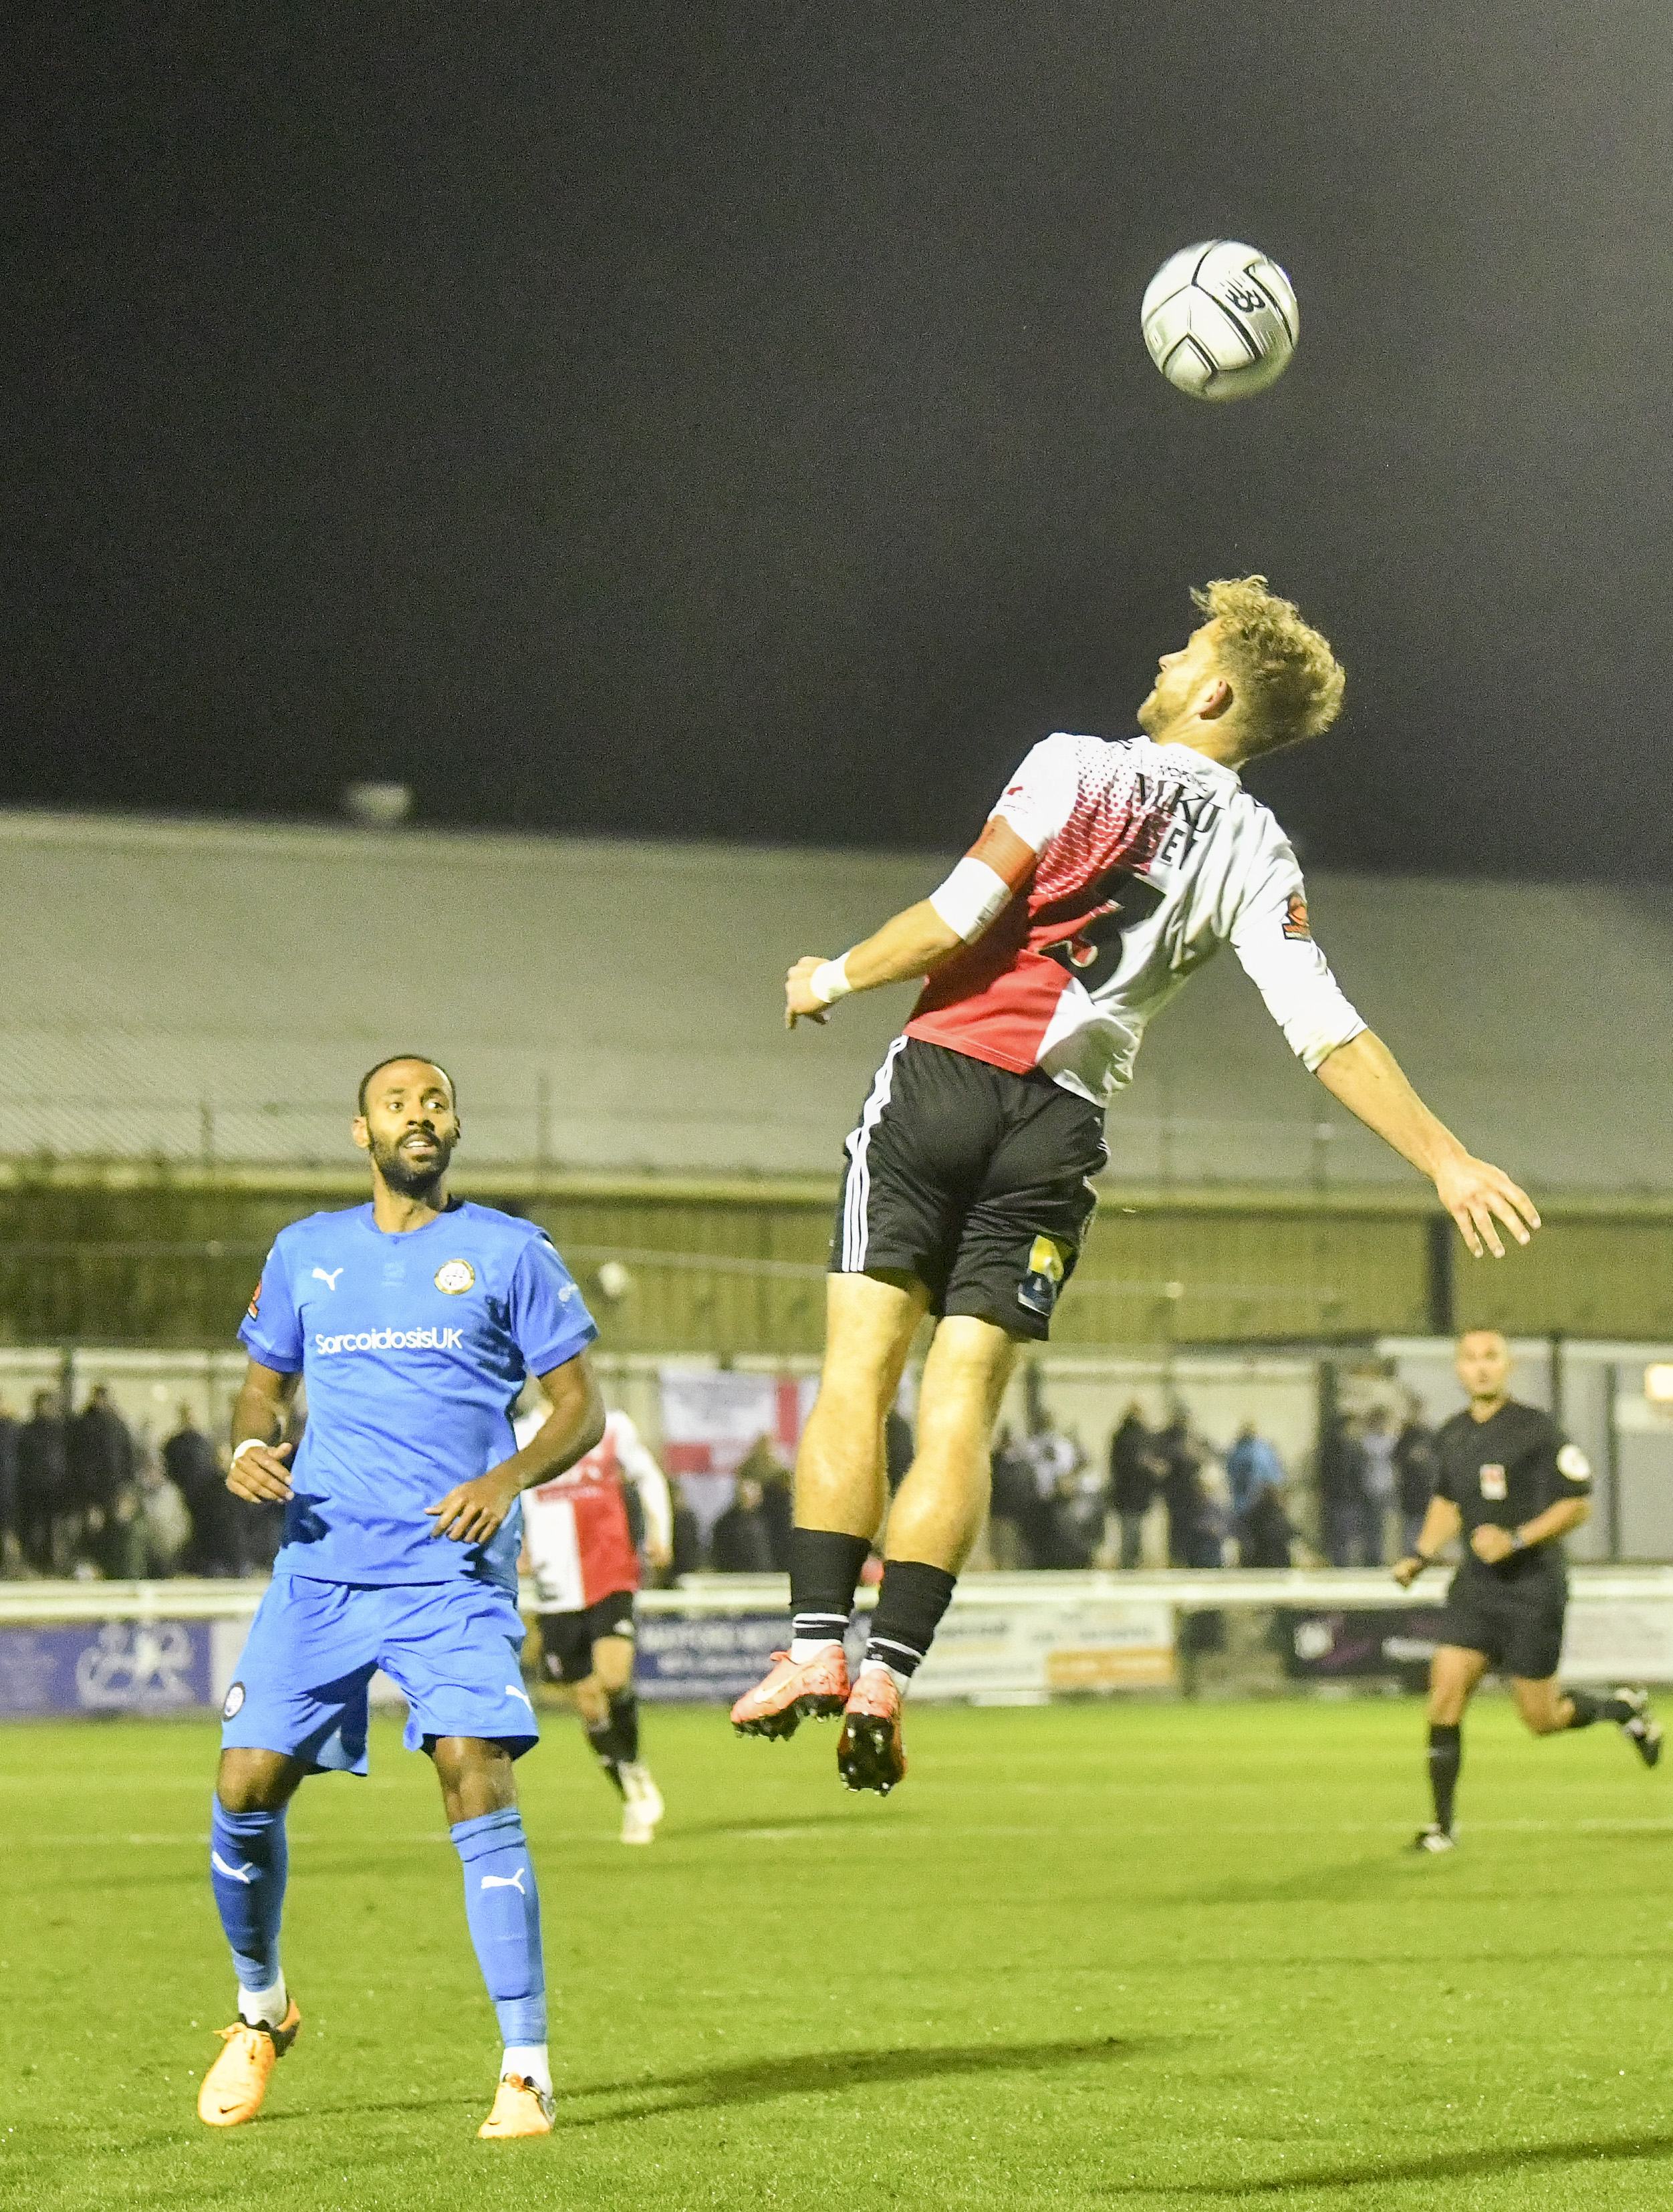 Woking’s captain rises to meet the ball